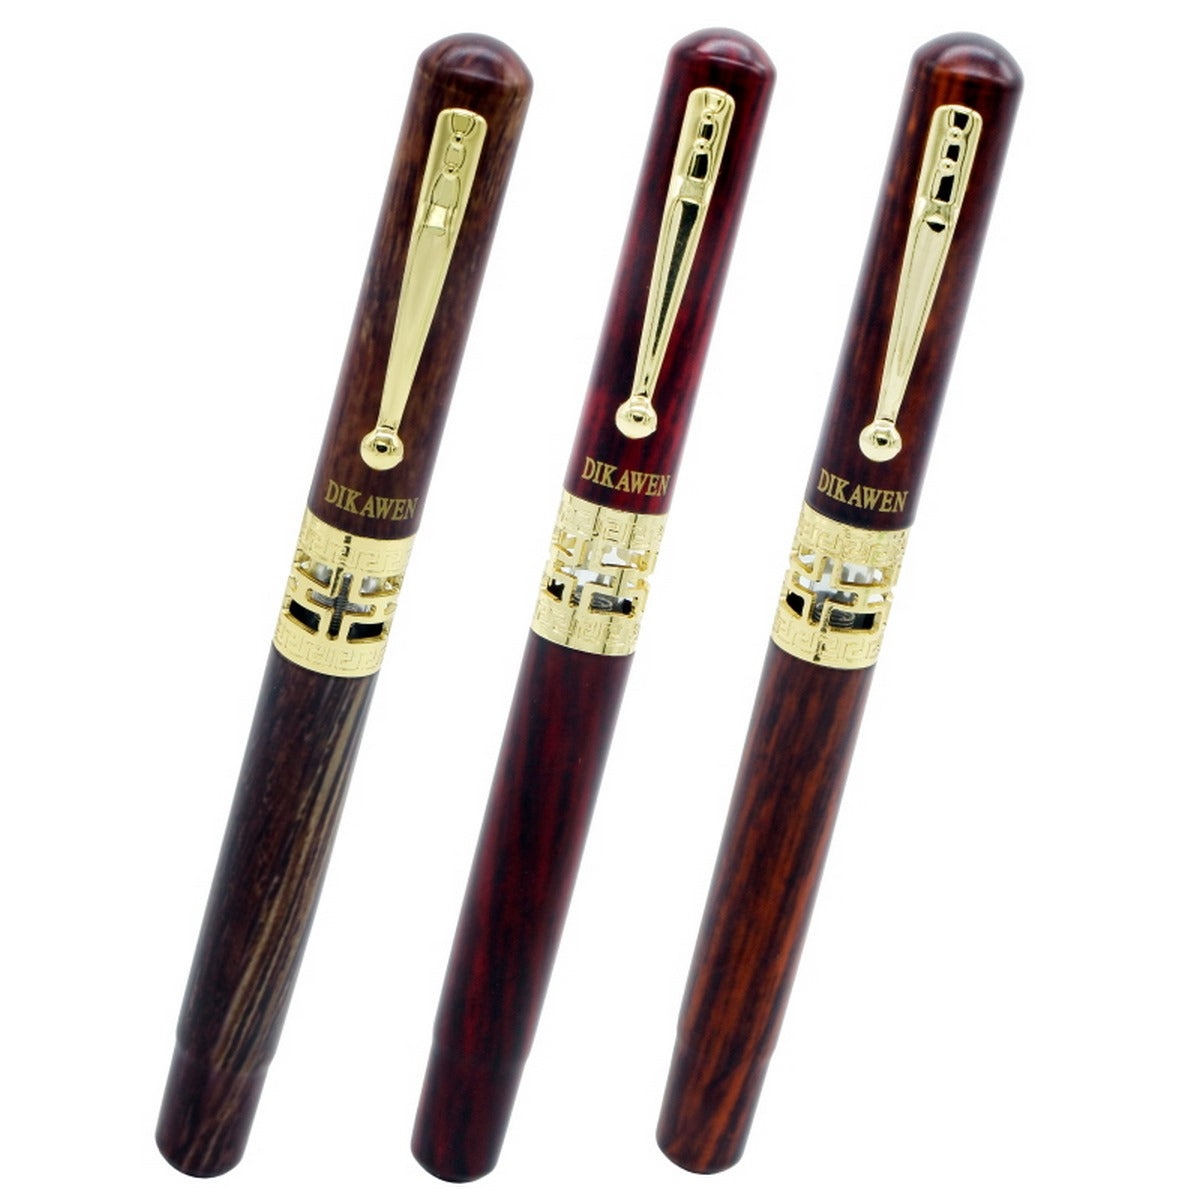 jags-mumbai Miniature Elegant Fountain Pen with Color Wood Finish and Golden Clip - Model 8060FPC